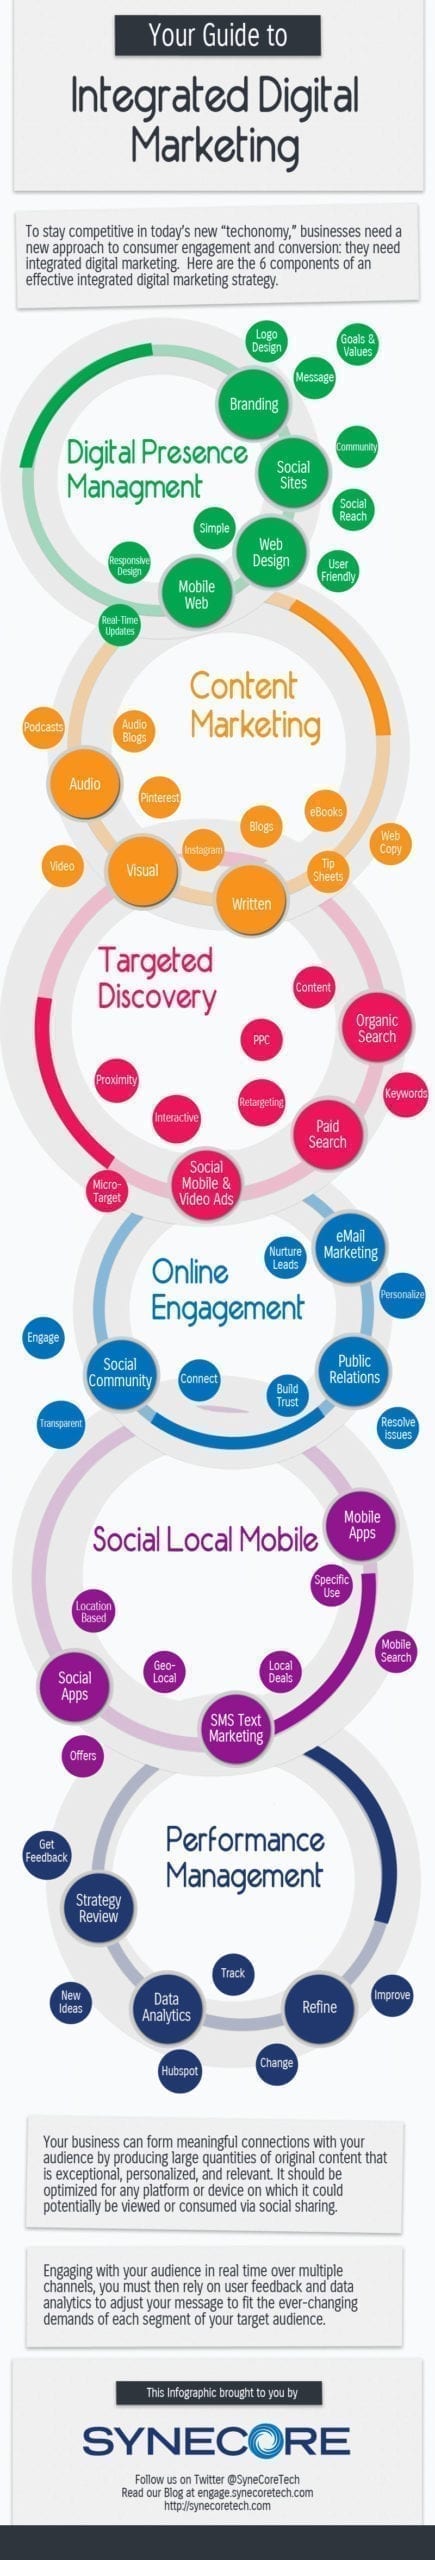 Guide-to-Integrated-Digital-Marketing